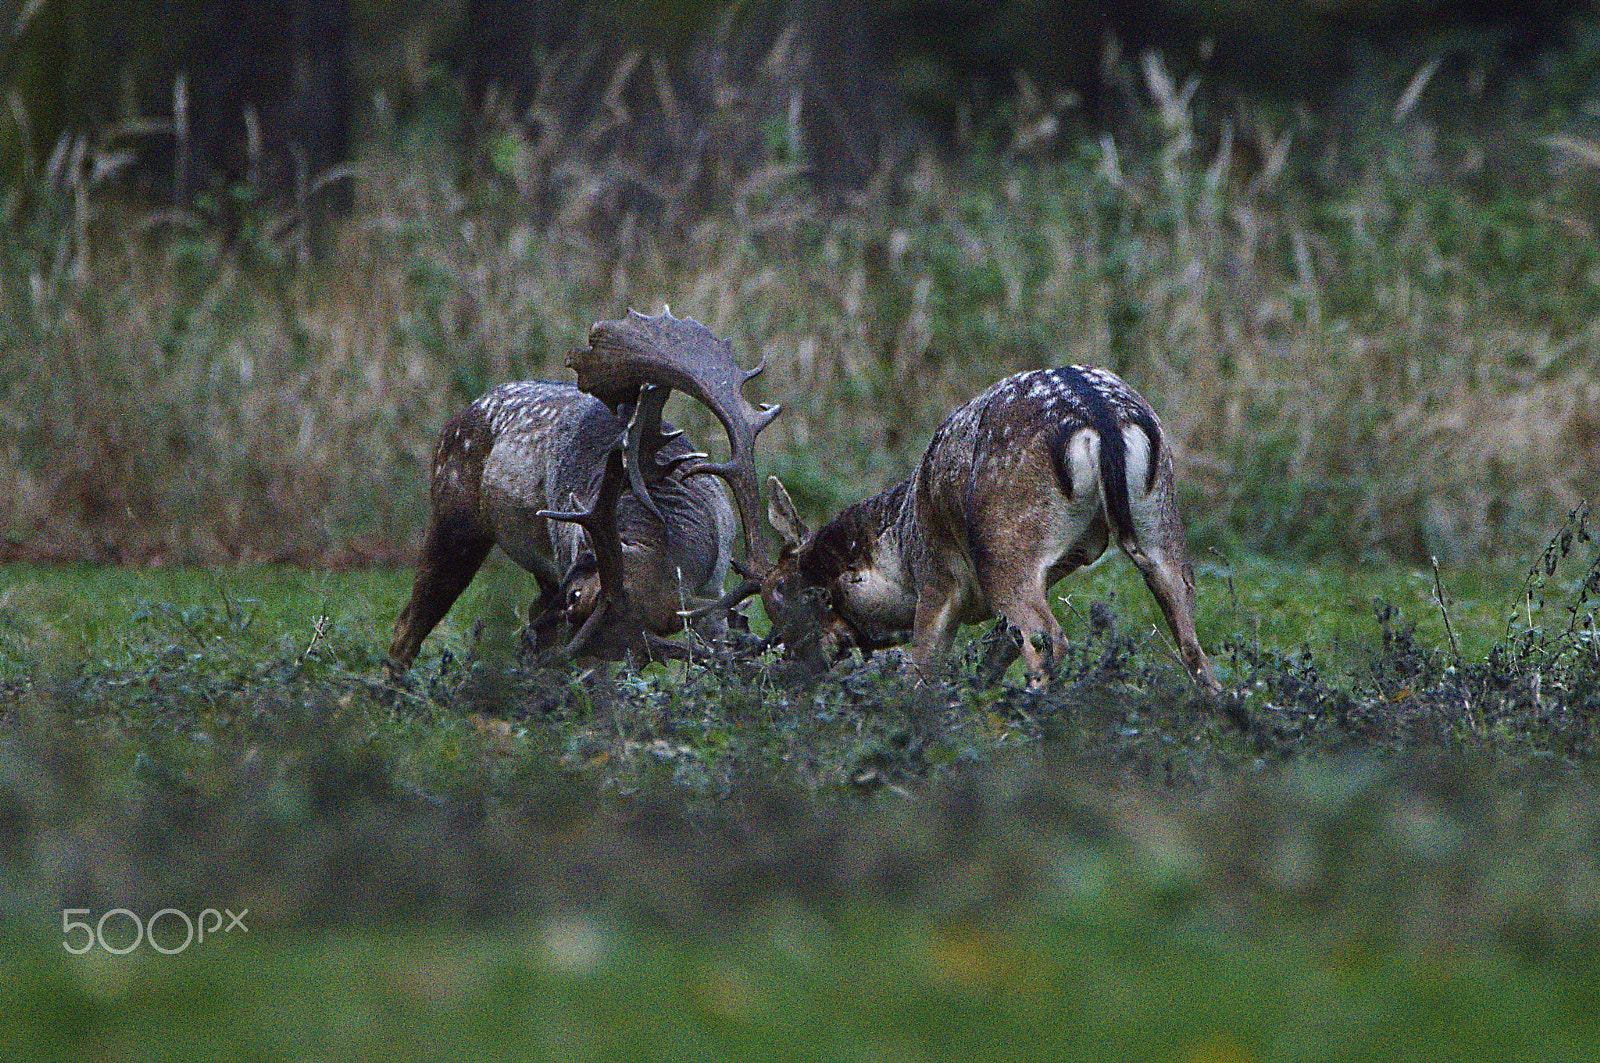 150.00 - 600.00 mm f/5.0 - 6.3 sample photo. Fallow deer fight during a rutting season photography